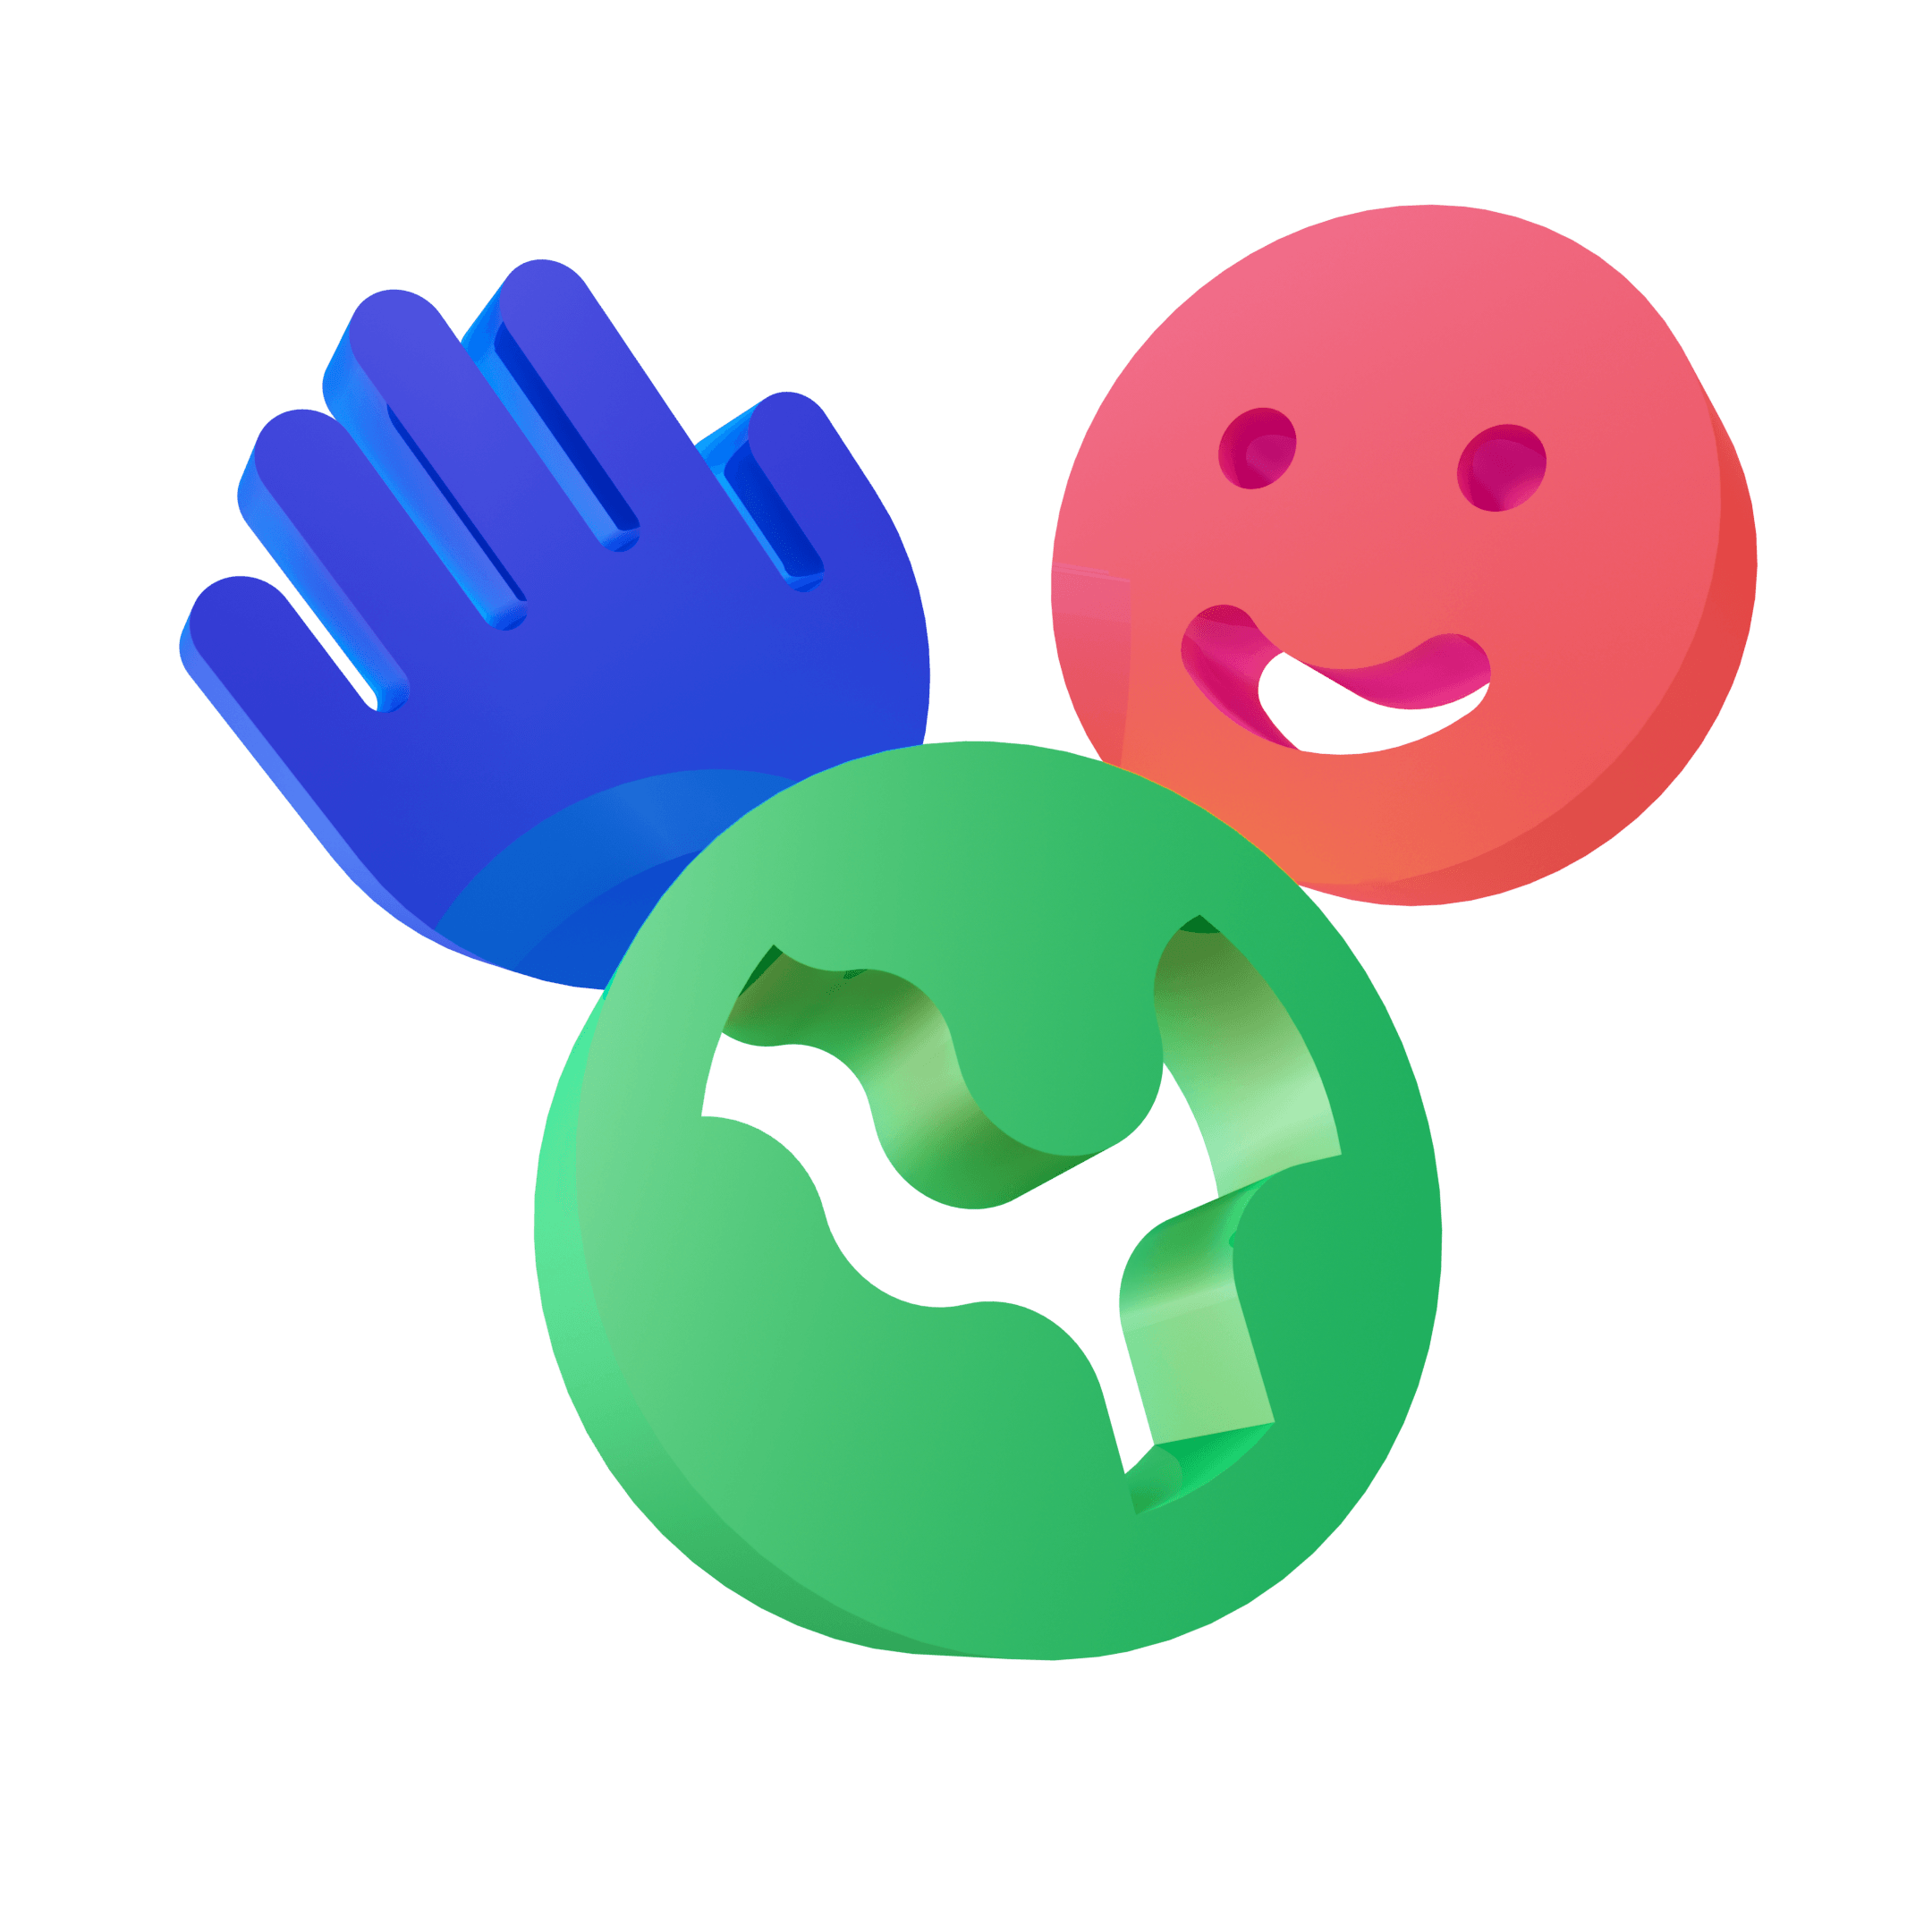 A picture of a blue hand, green earth, and red smiley face.